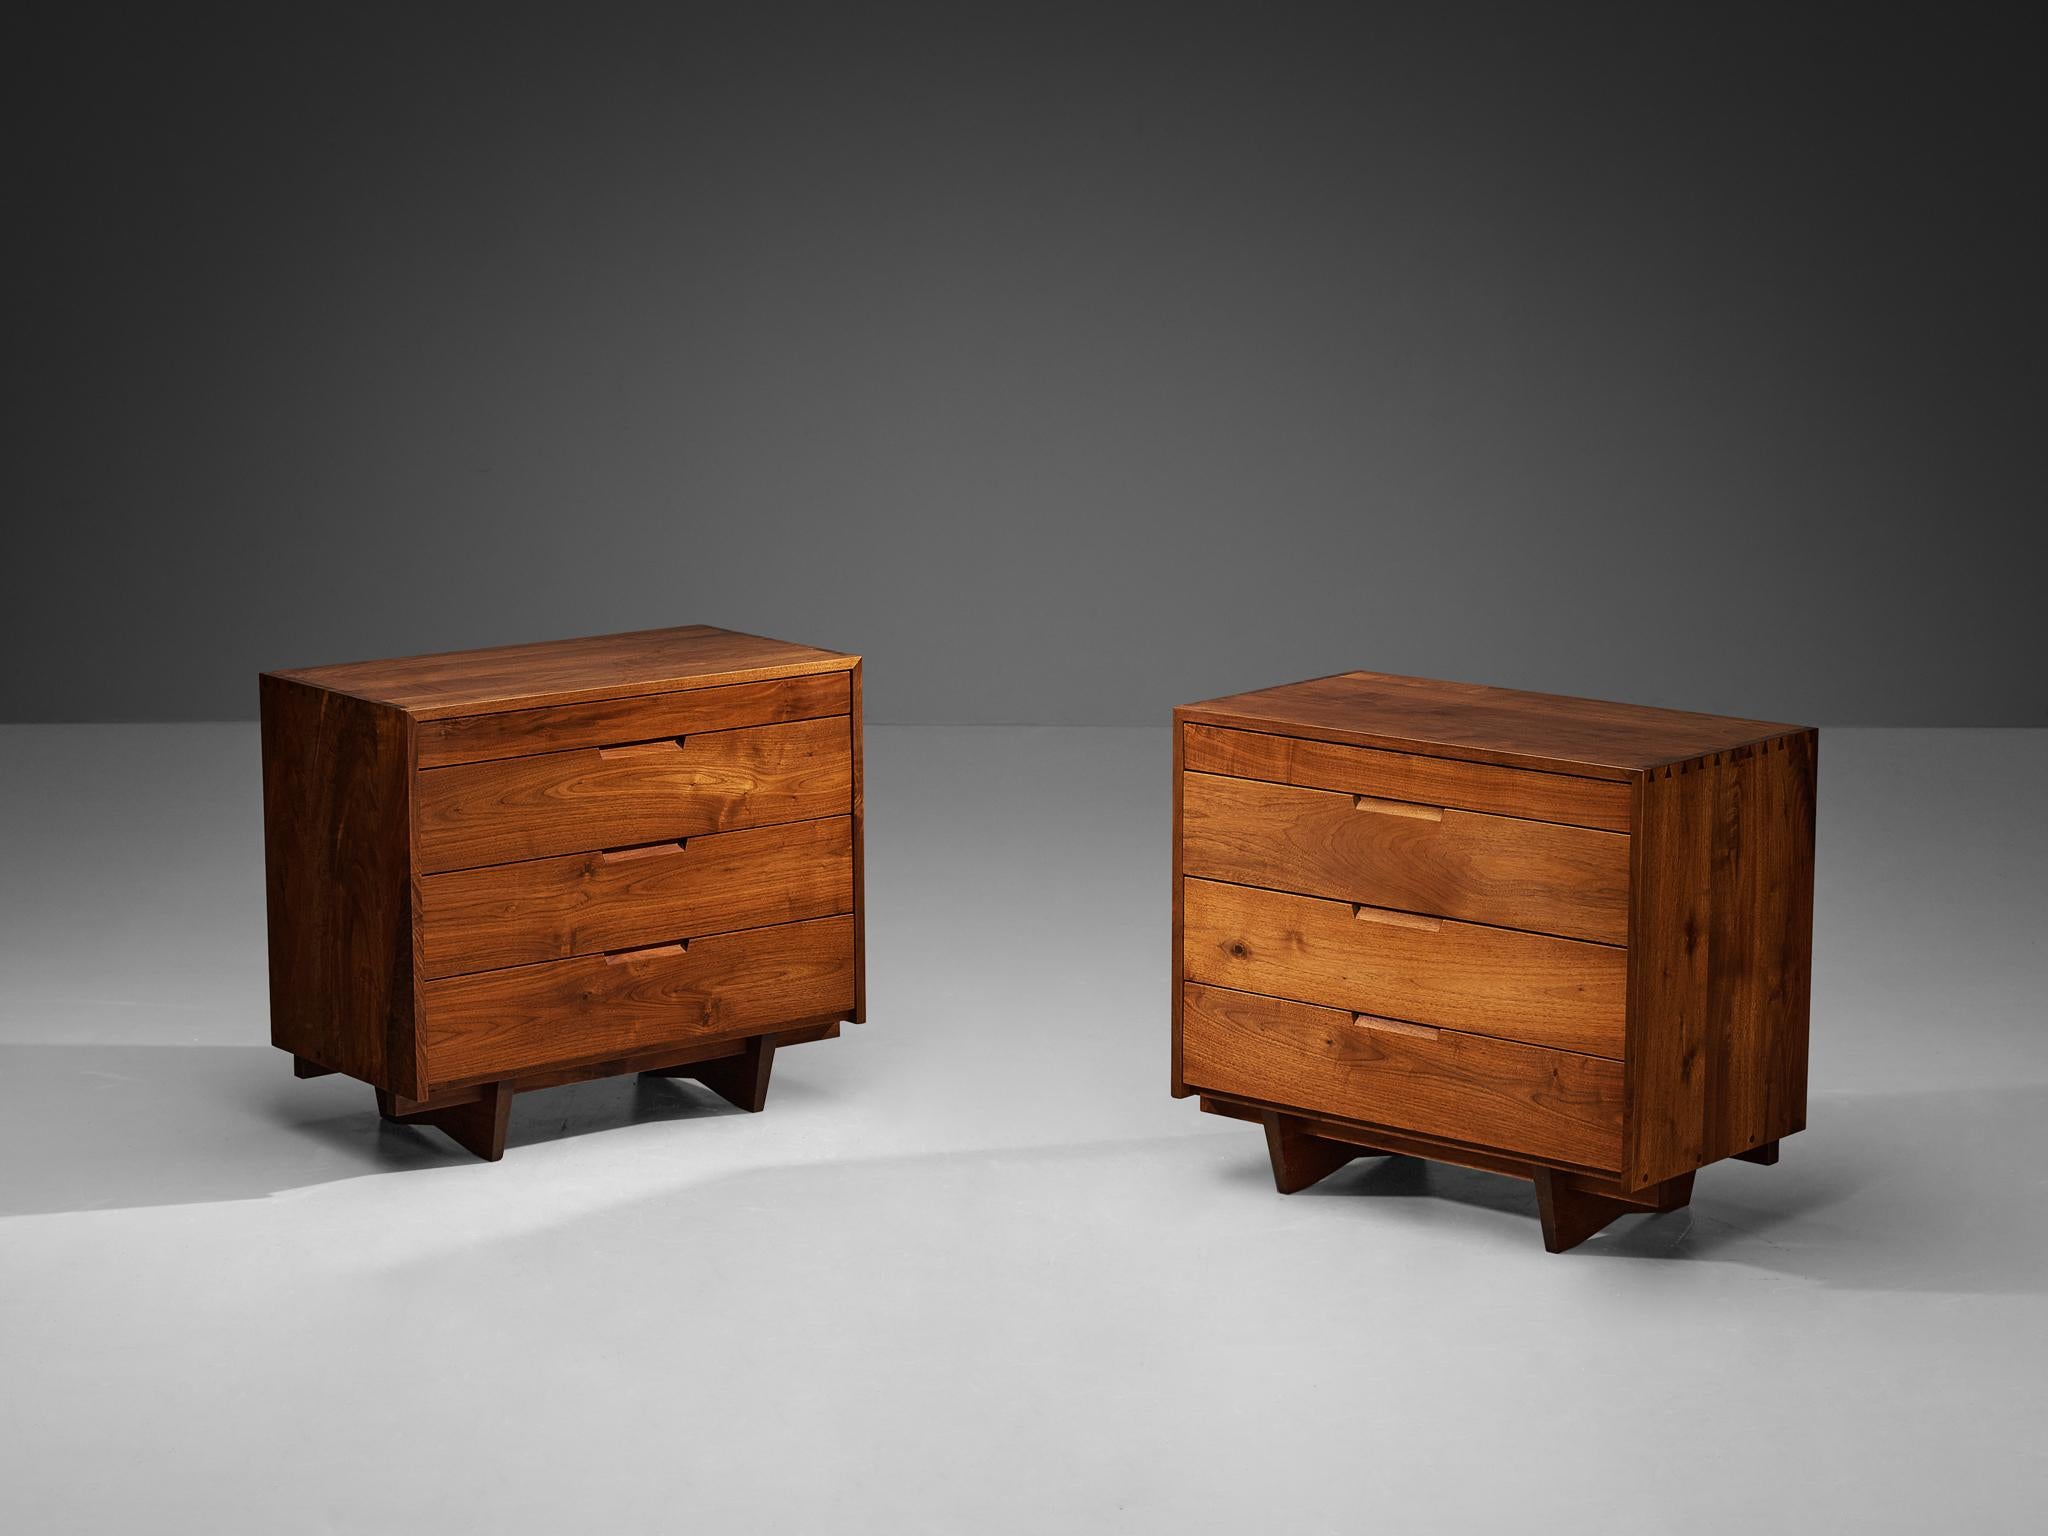 George Nakashima for George Nakashima Studio, pair of chest of drawers or cabinets, American black walnut, United States, 1975 

With regard to its essential form, material use, and woodwork, this chest of drawers is a testimony to George